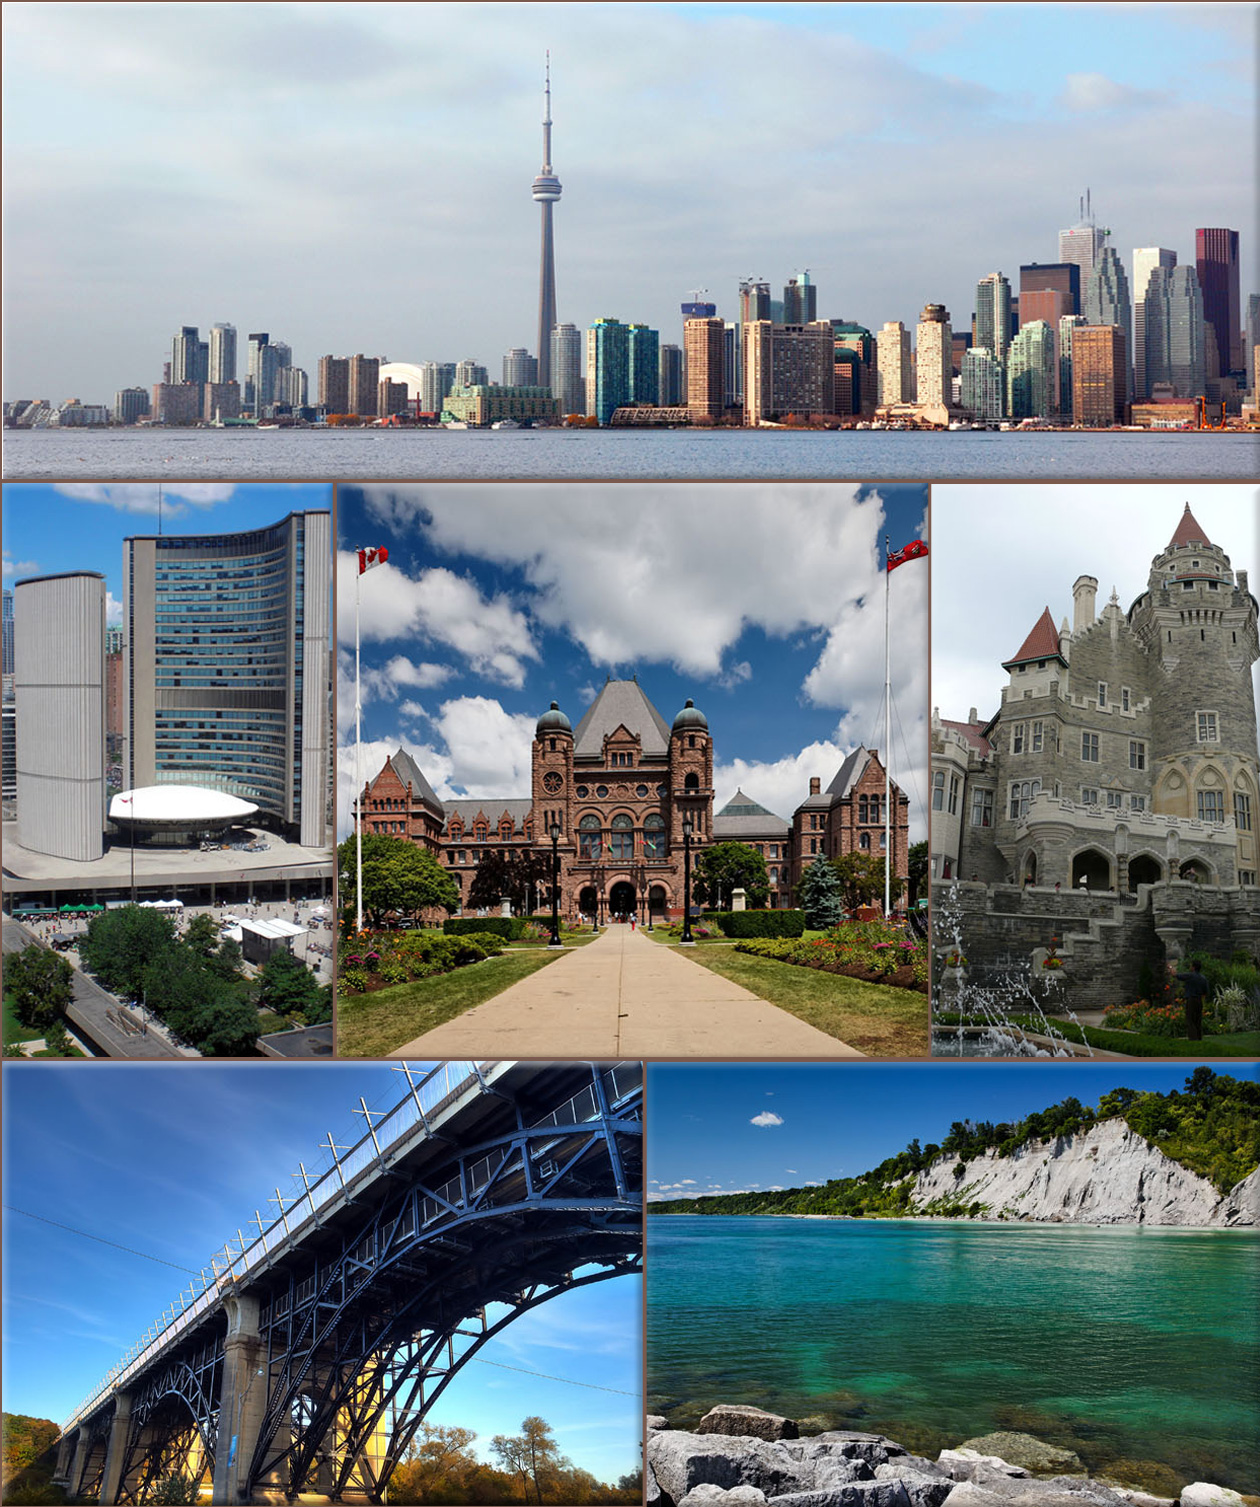 Toronto the largest city in Canada and the provincial capital of Ontario: ● Downtown Toronto featuring the CN Tower and Financial District from the Toronto Islands, ● City Hall, ● the Ontario Legislative Building, ● Casa Loma, ● Prince Edward Viaduct, and the ● Scarborough Bluffs